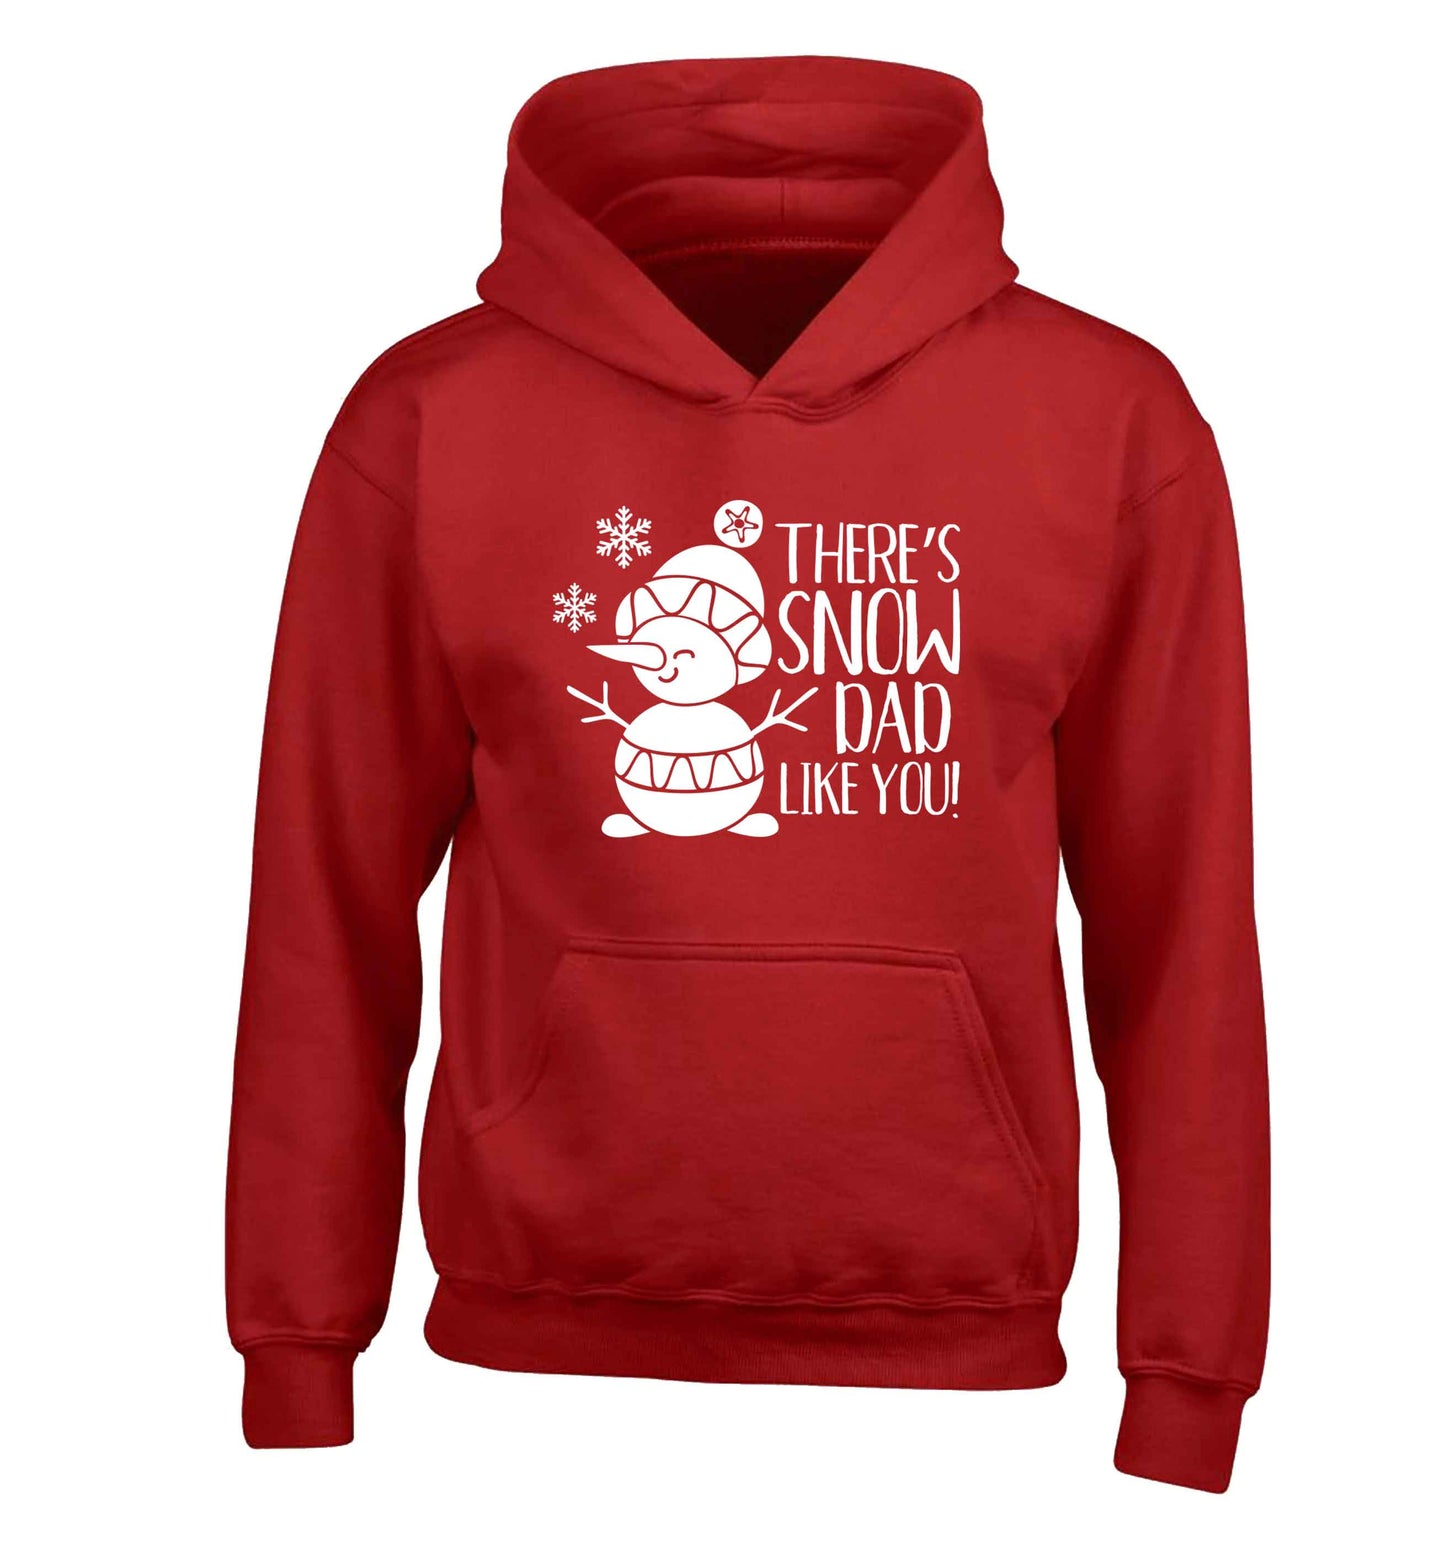 There's snow dad like you children's red hoodie 12-13 Years